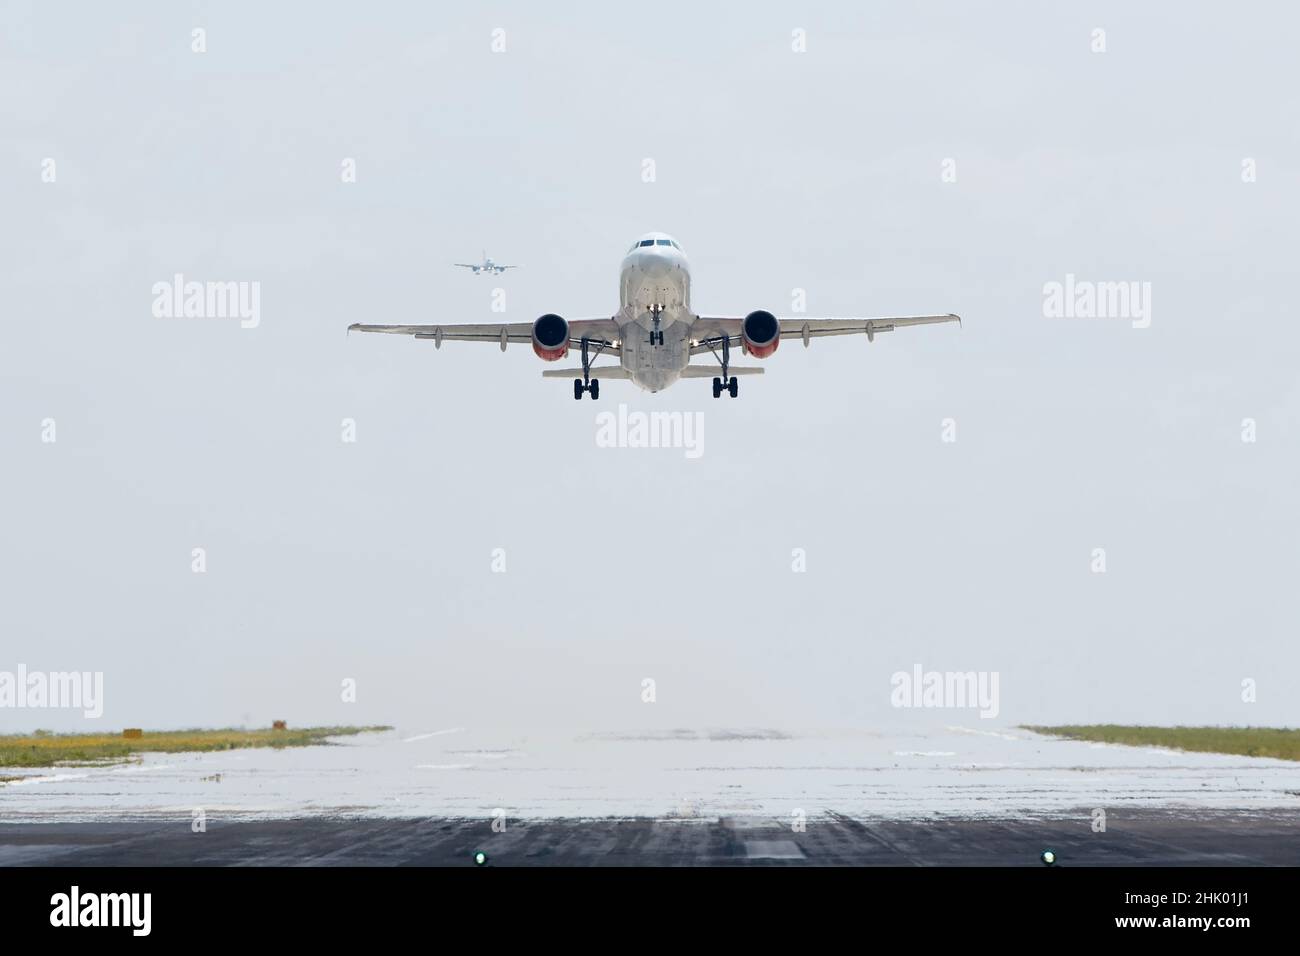 Airplane taking off from airport runway while another airplane is approaching to landing. Stock Photo